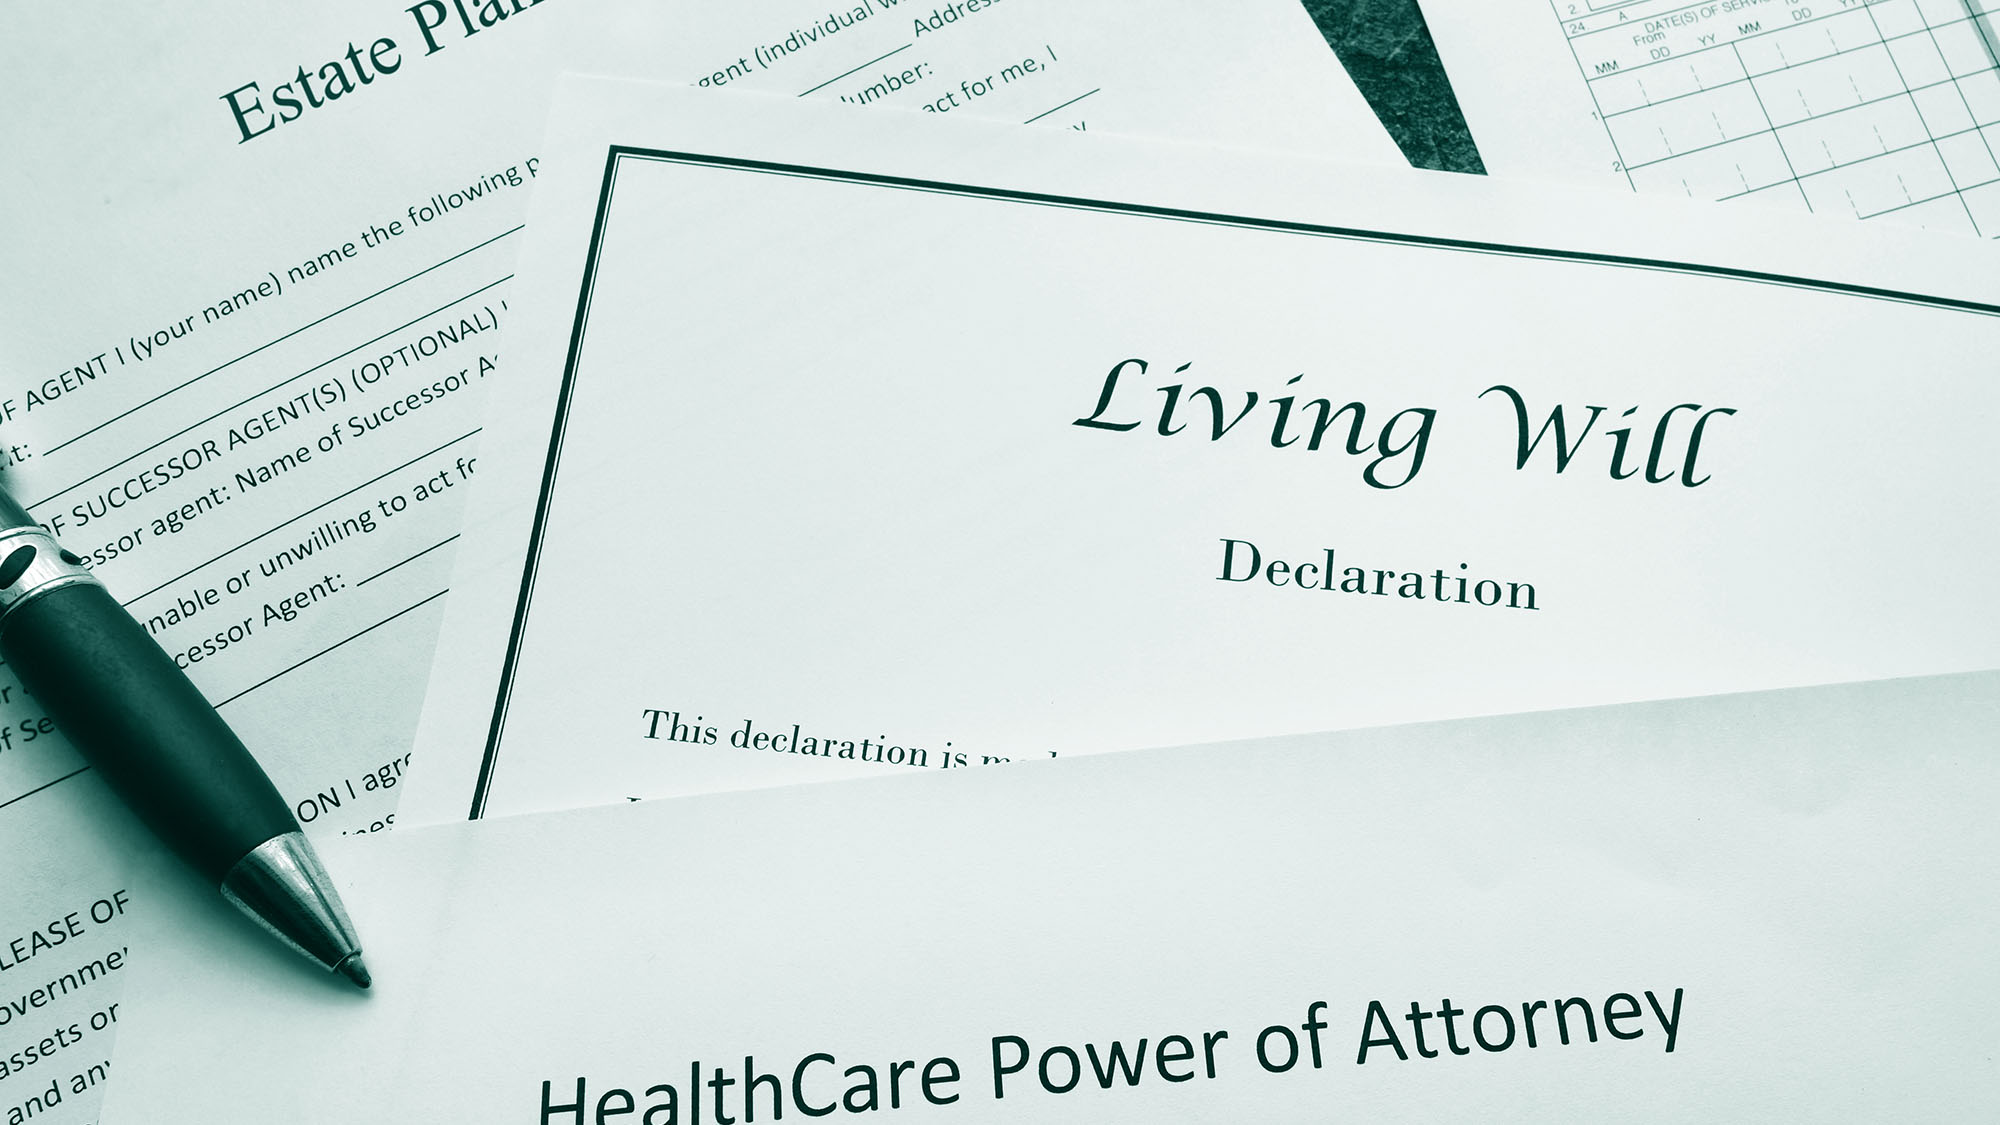 Estate Plan, Living Will, and Healthcare Power of Attorney documents